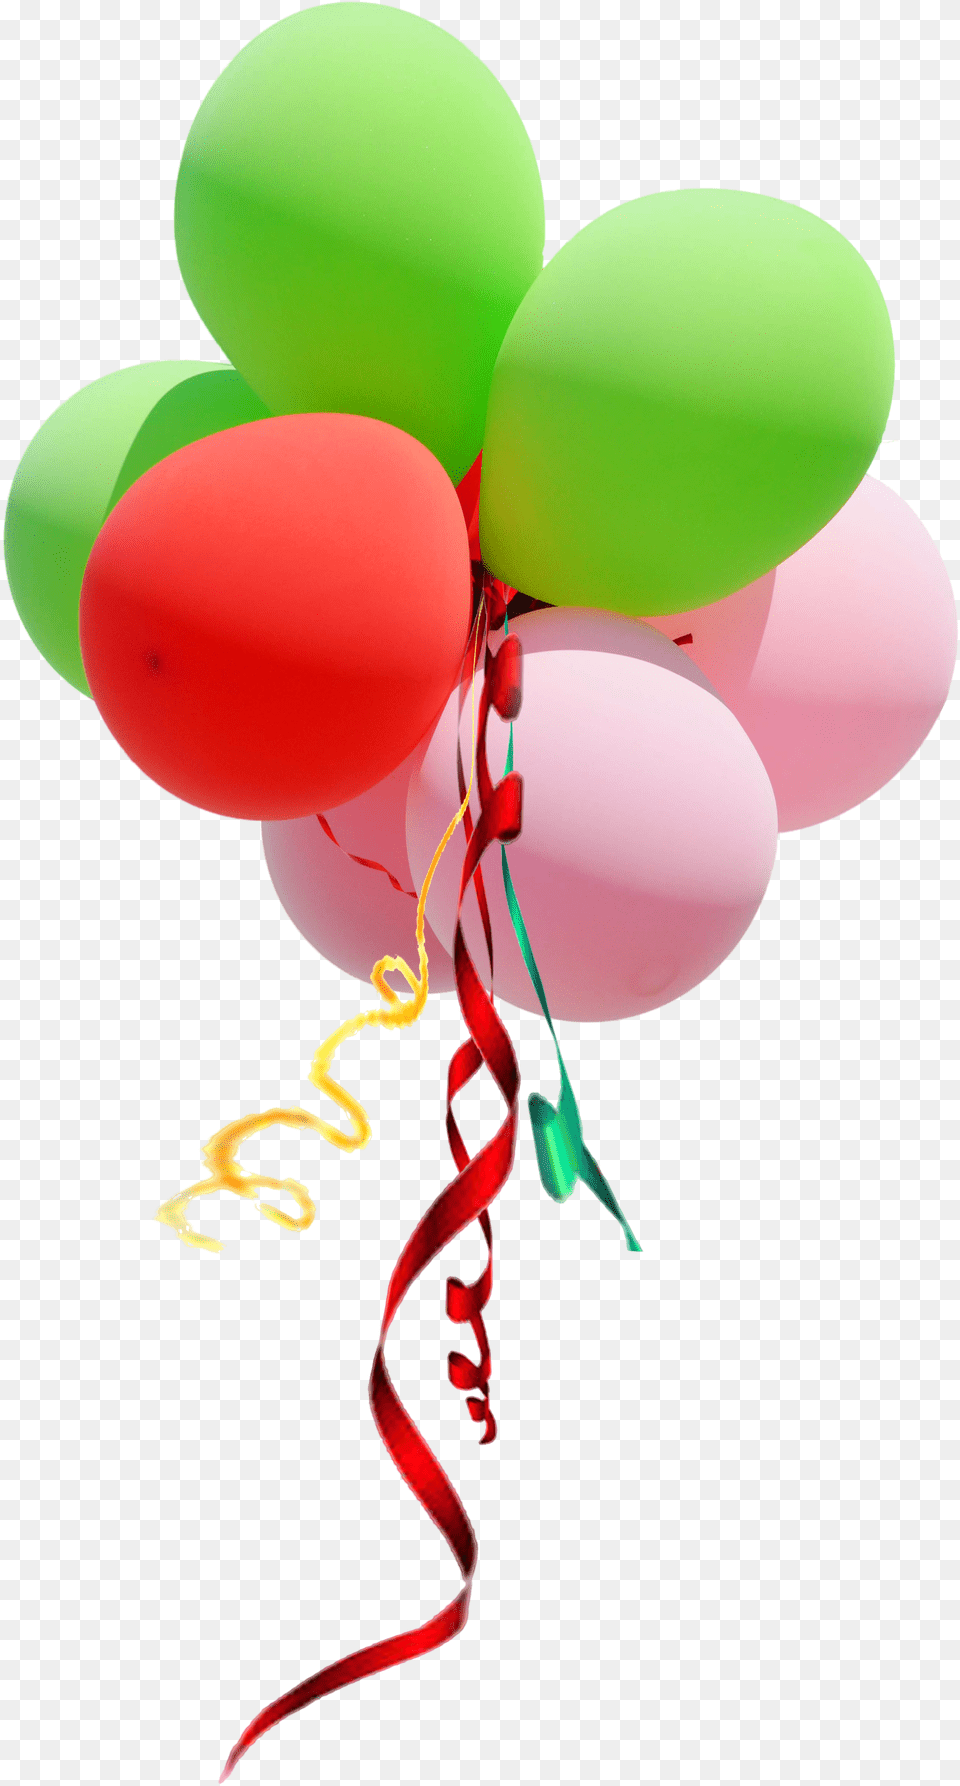 Ribbons Stock Photo 0189 By Balloon And Ribbon Birthday Free Transparent Png